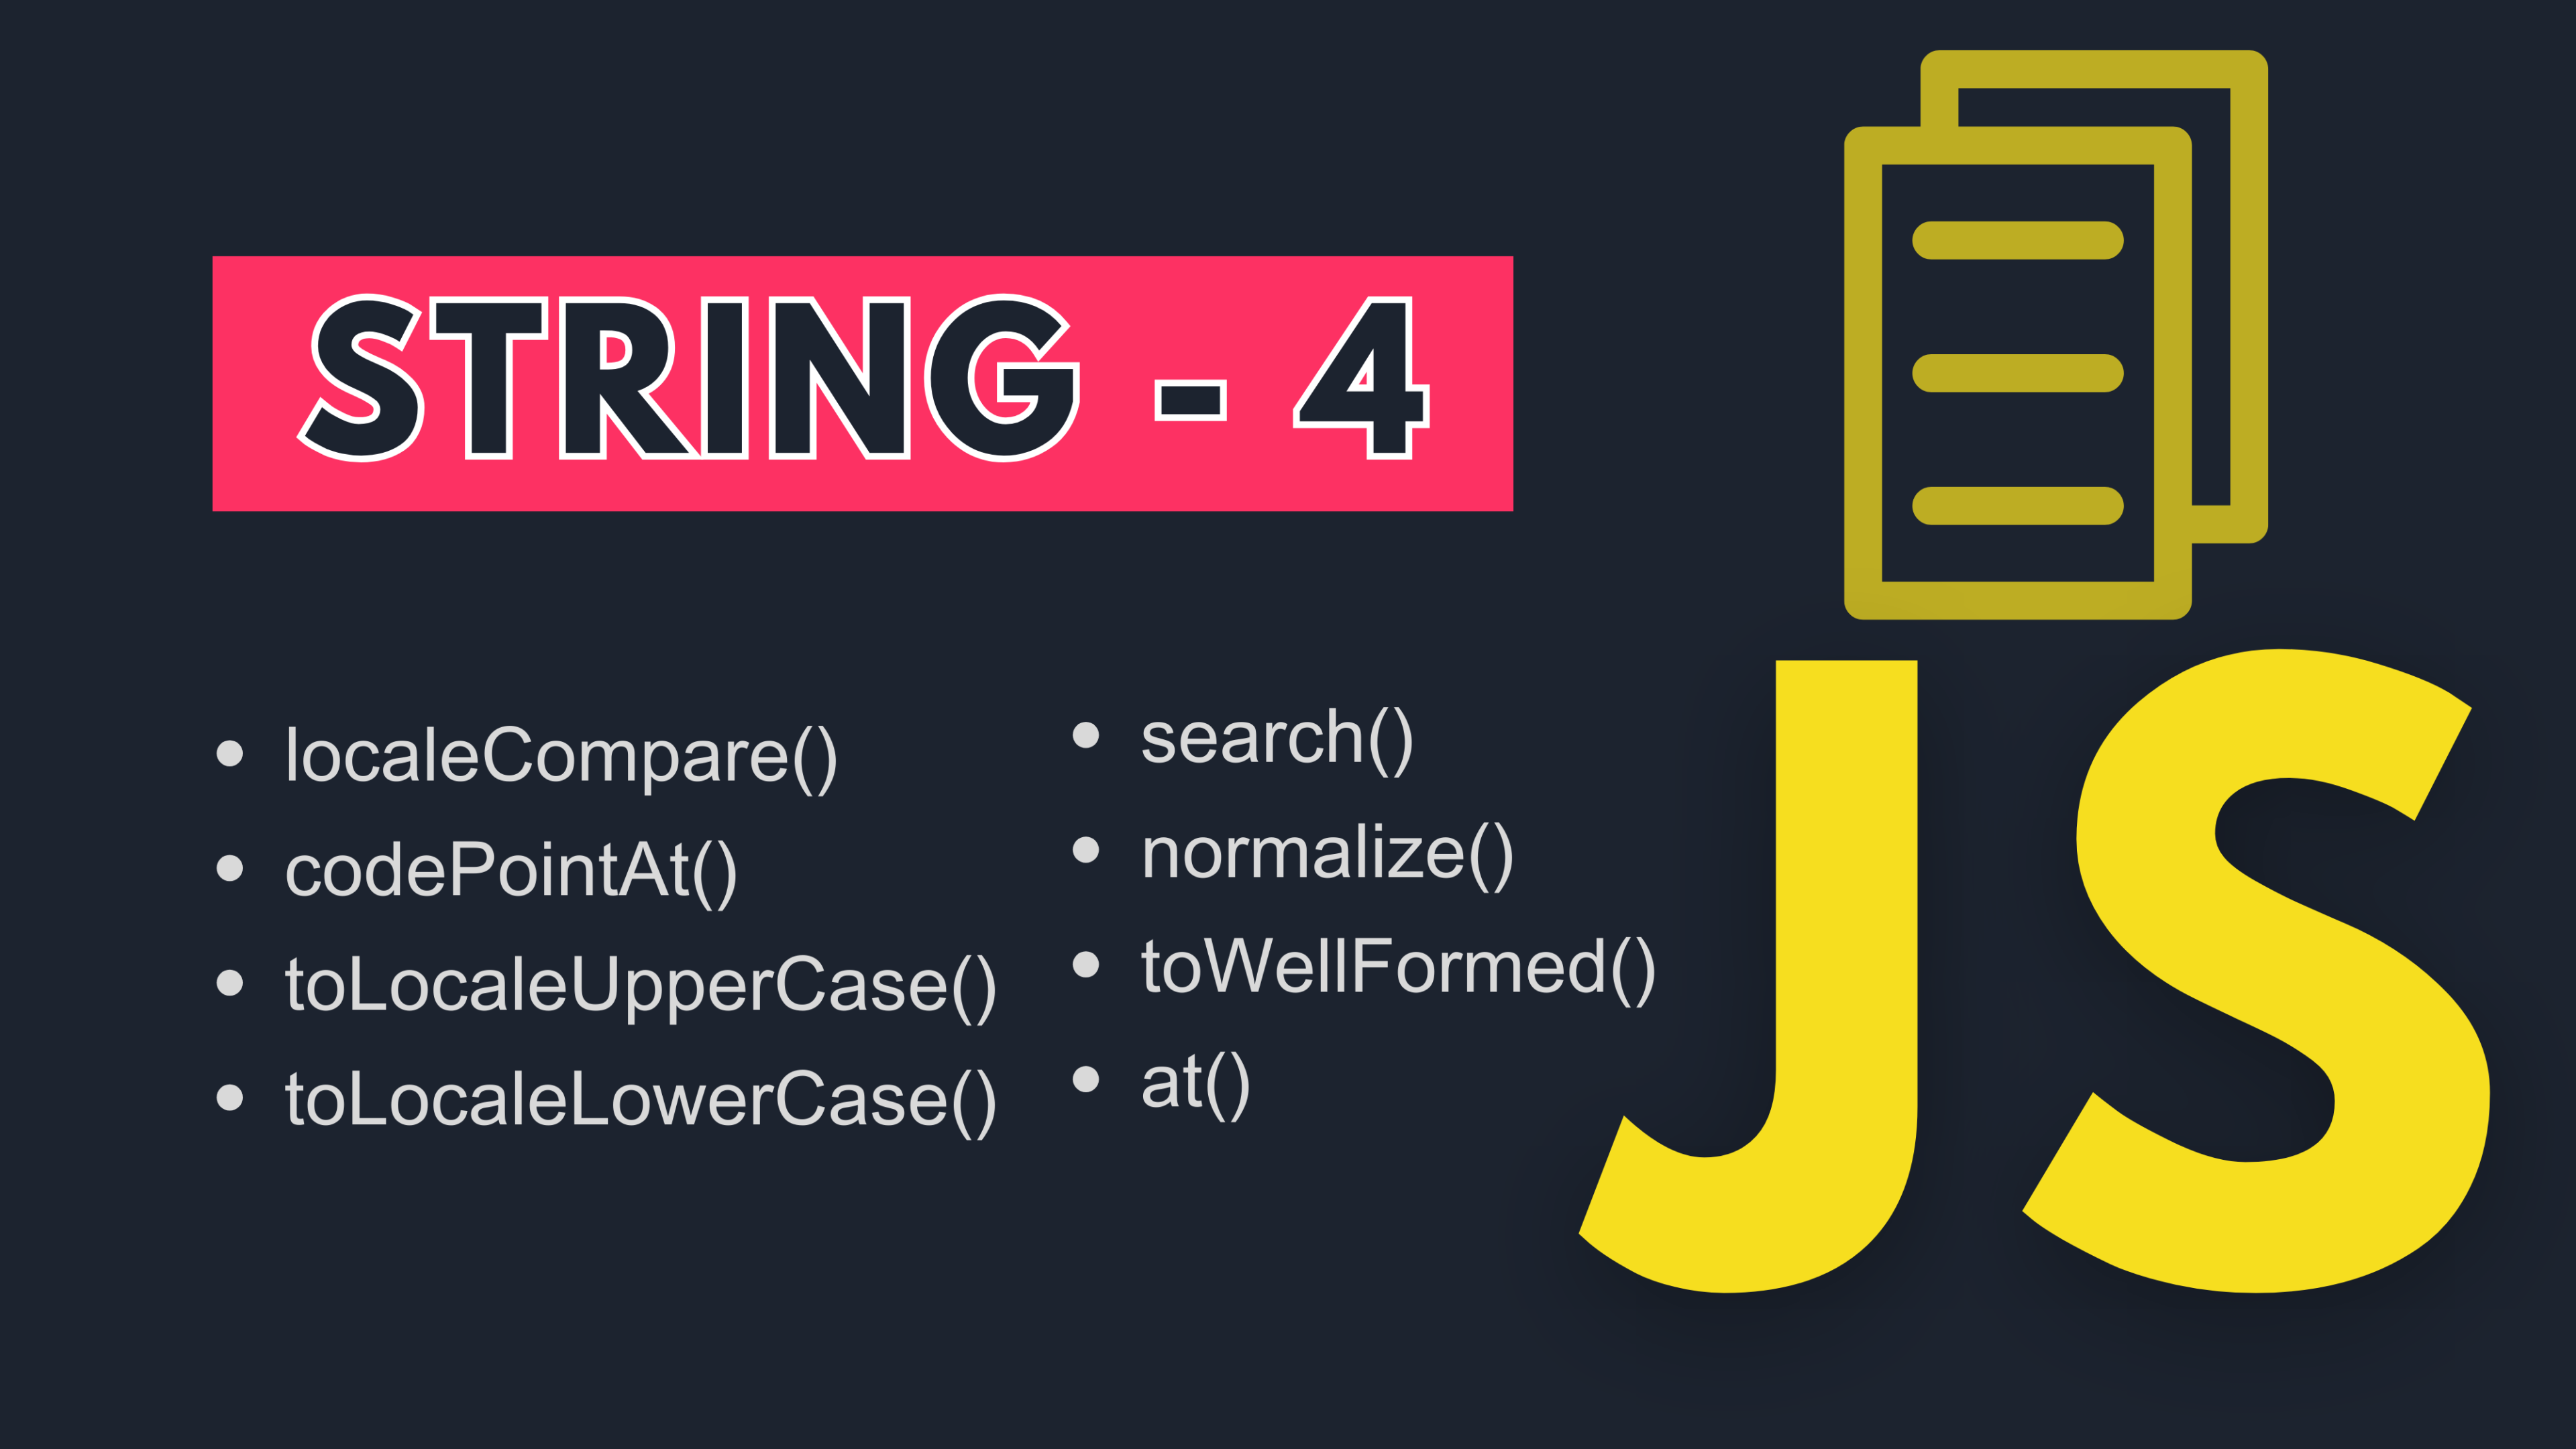 Cover Image for Mastering JavaScript | 8 STRING METHODS | PART 4